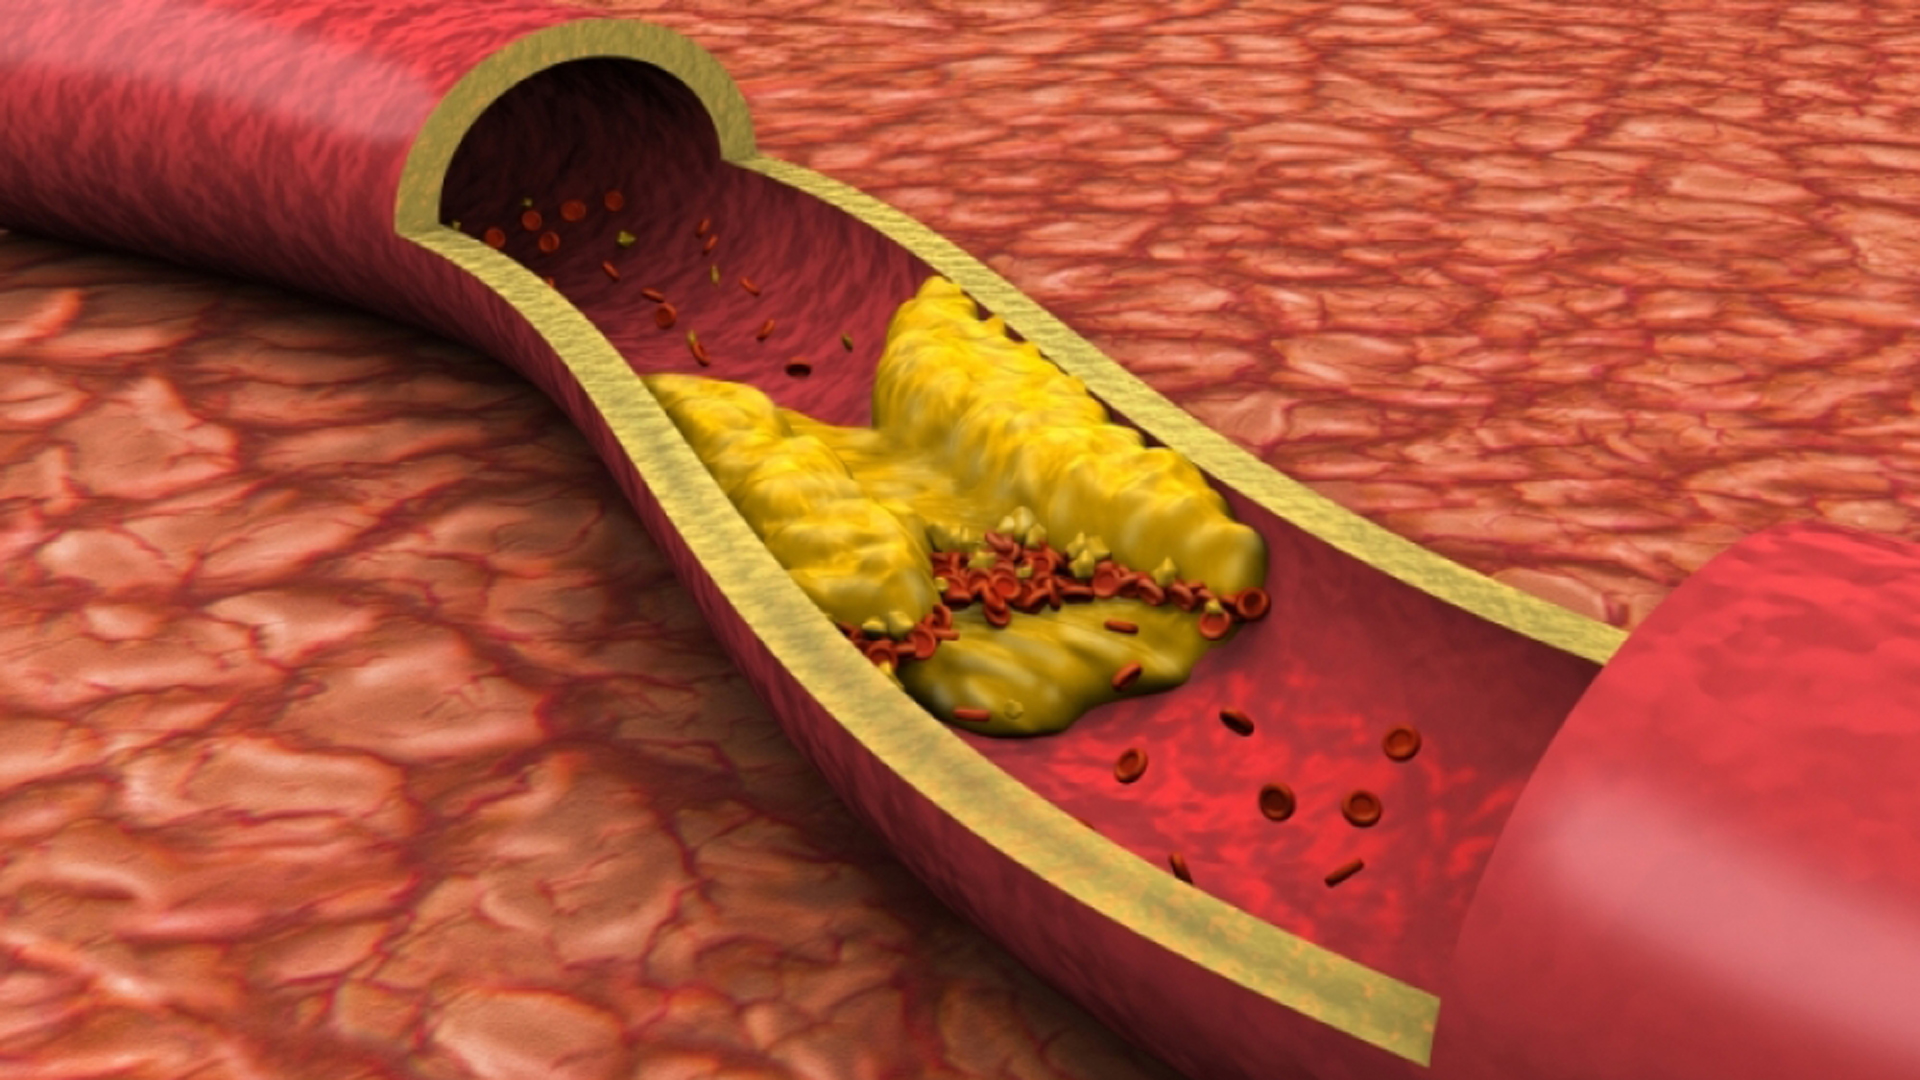 The accumulation of cholesterol plaques in the arteries can cause a blockage and subsequent heart attack